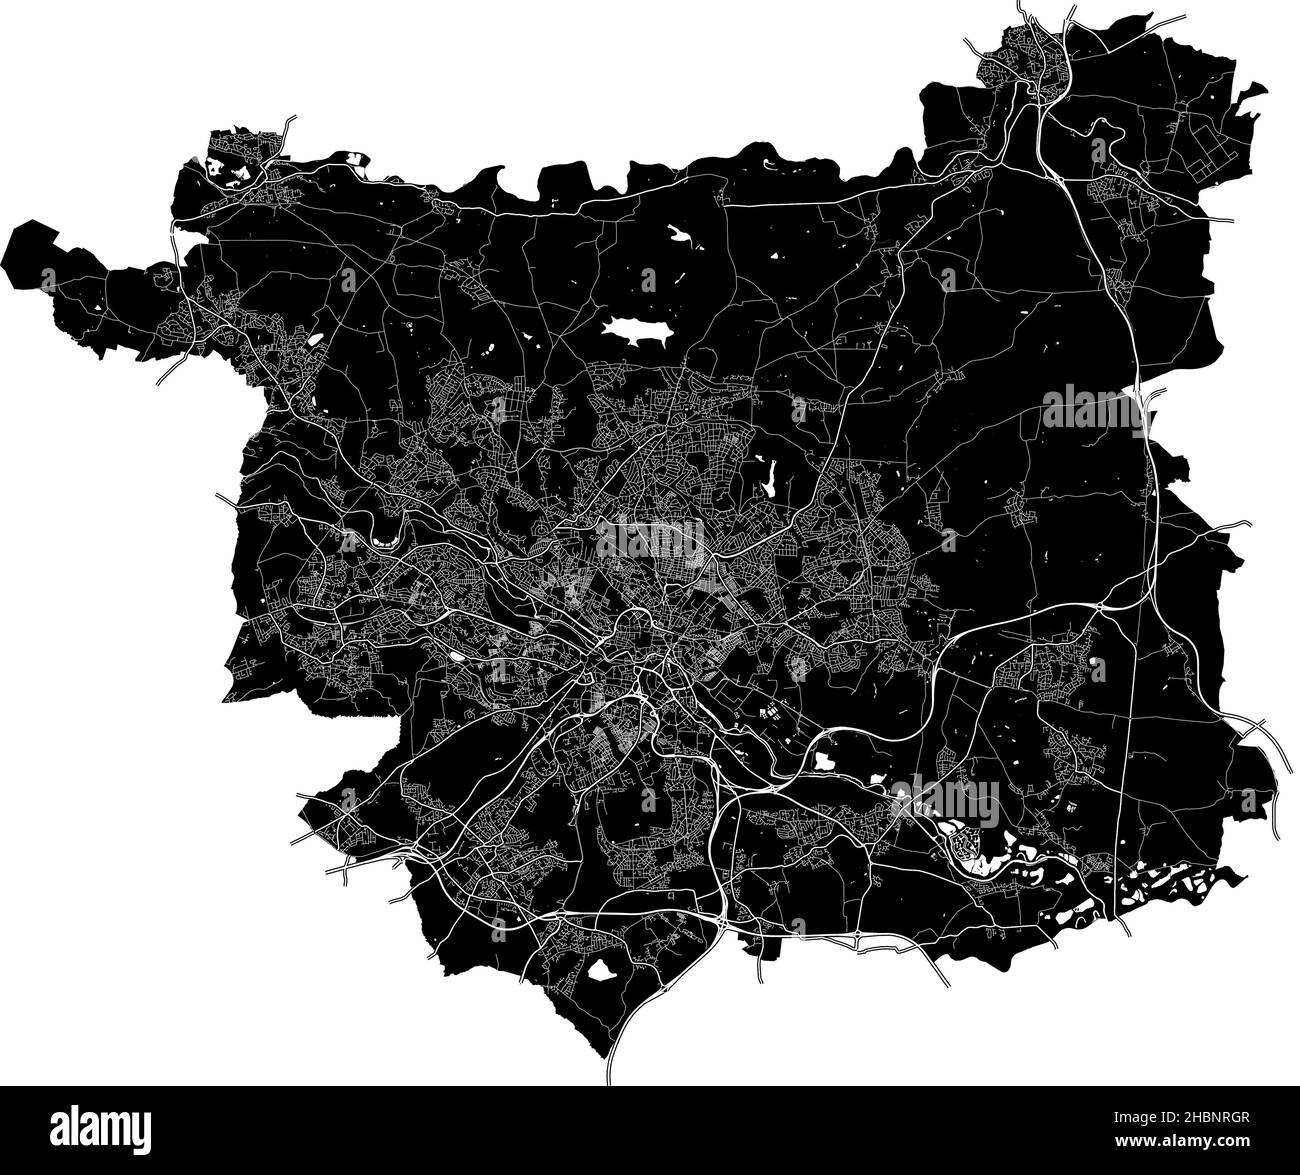 Leeds, England, high resolution vector map with city boundaries, and editable paths. The city map was drawn with white areas and lines for main roads, Stock Vector